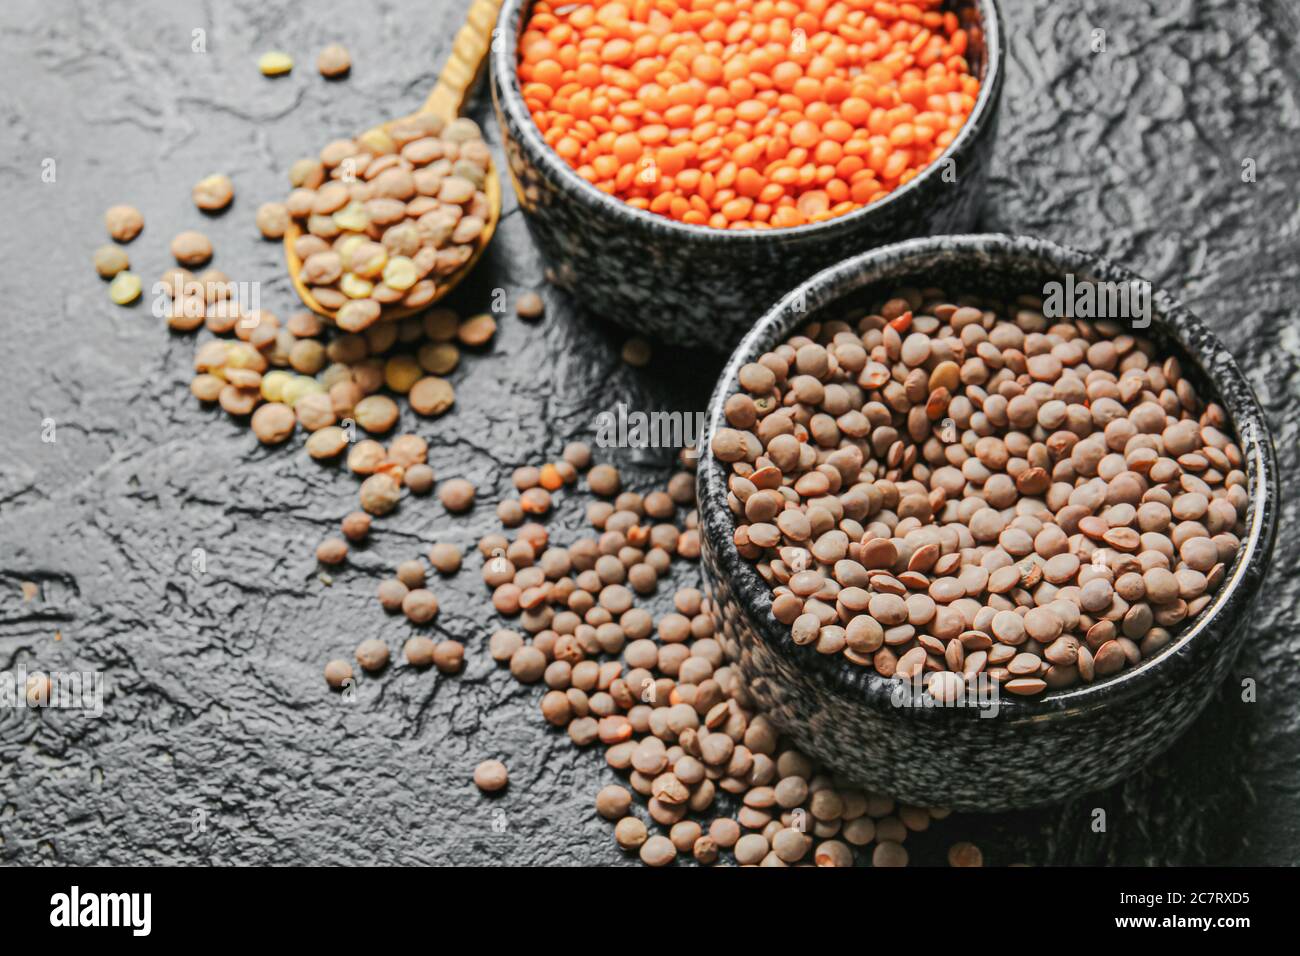 Bowls with lentils on dark background Stock Photo